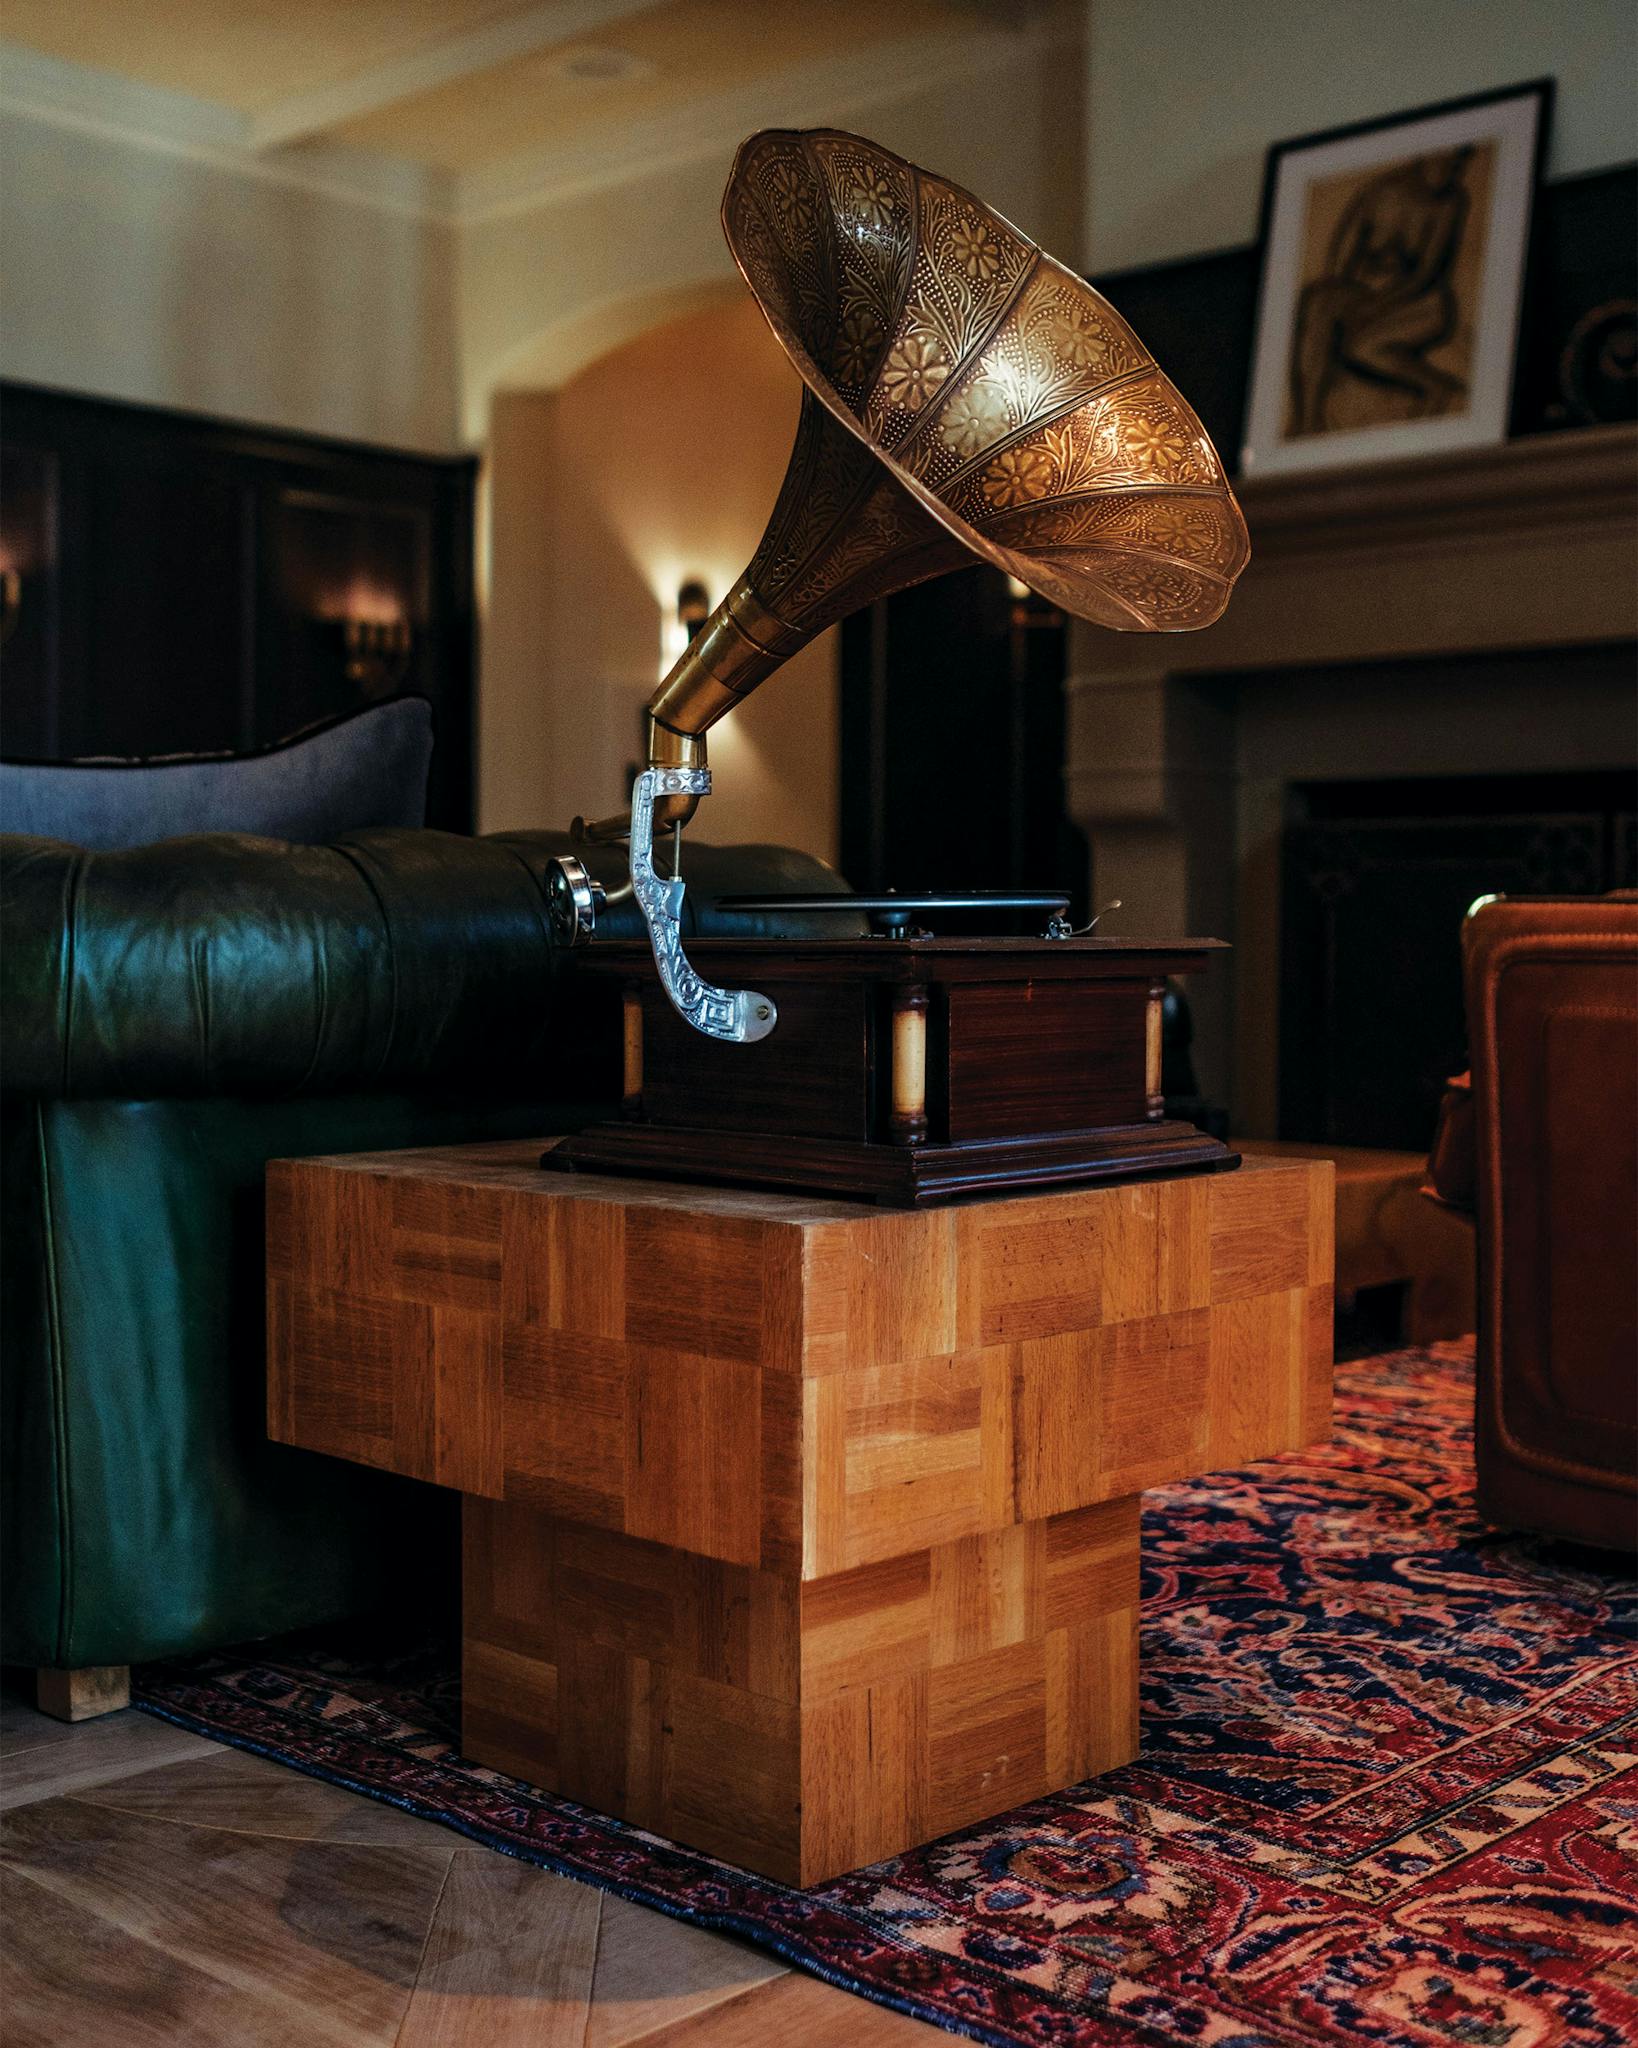 If you’ve been to Round Top Antiques Fair over the past couple years, you may have passed Fulk shopping for the Commodore Perry Estate. He furnished the common areas with uniquely Texan and vintage artifacts like this gramophone, which sets the scene for guests and members to relax with timeless tunes (while sipping vintage tipples).